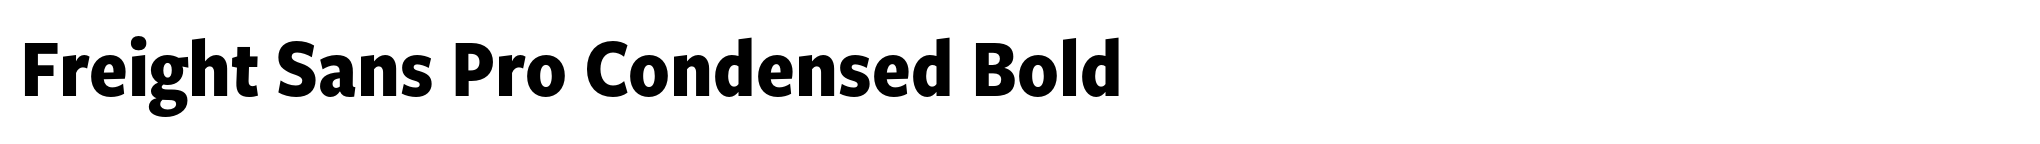 Freight Sans Pro Condensed Bold image